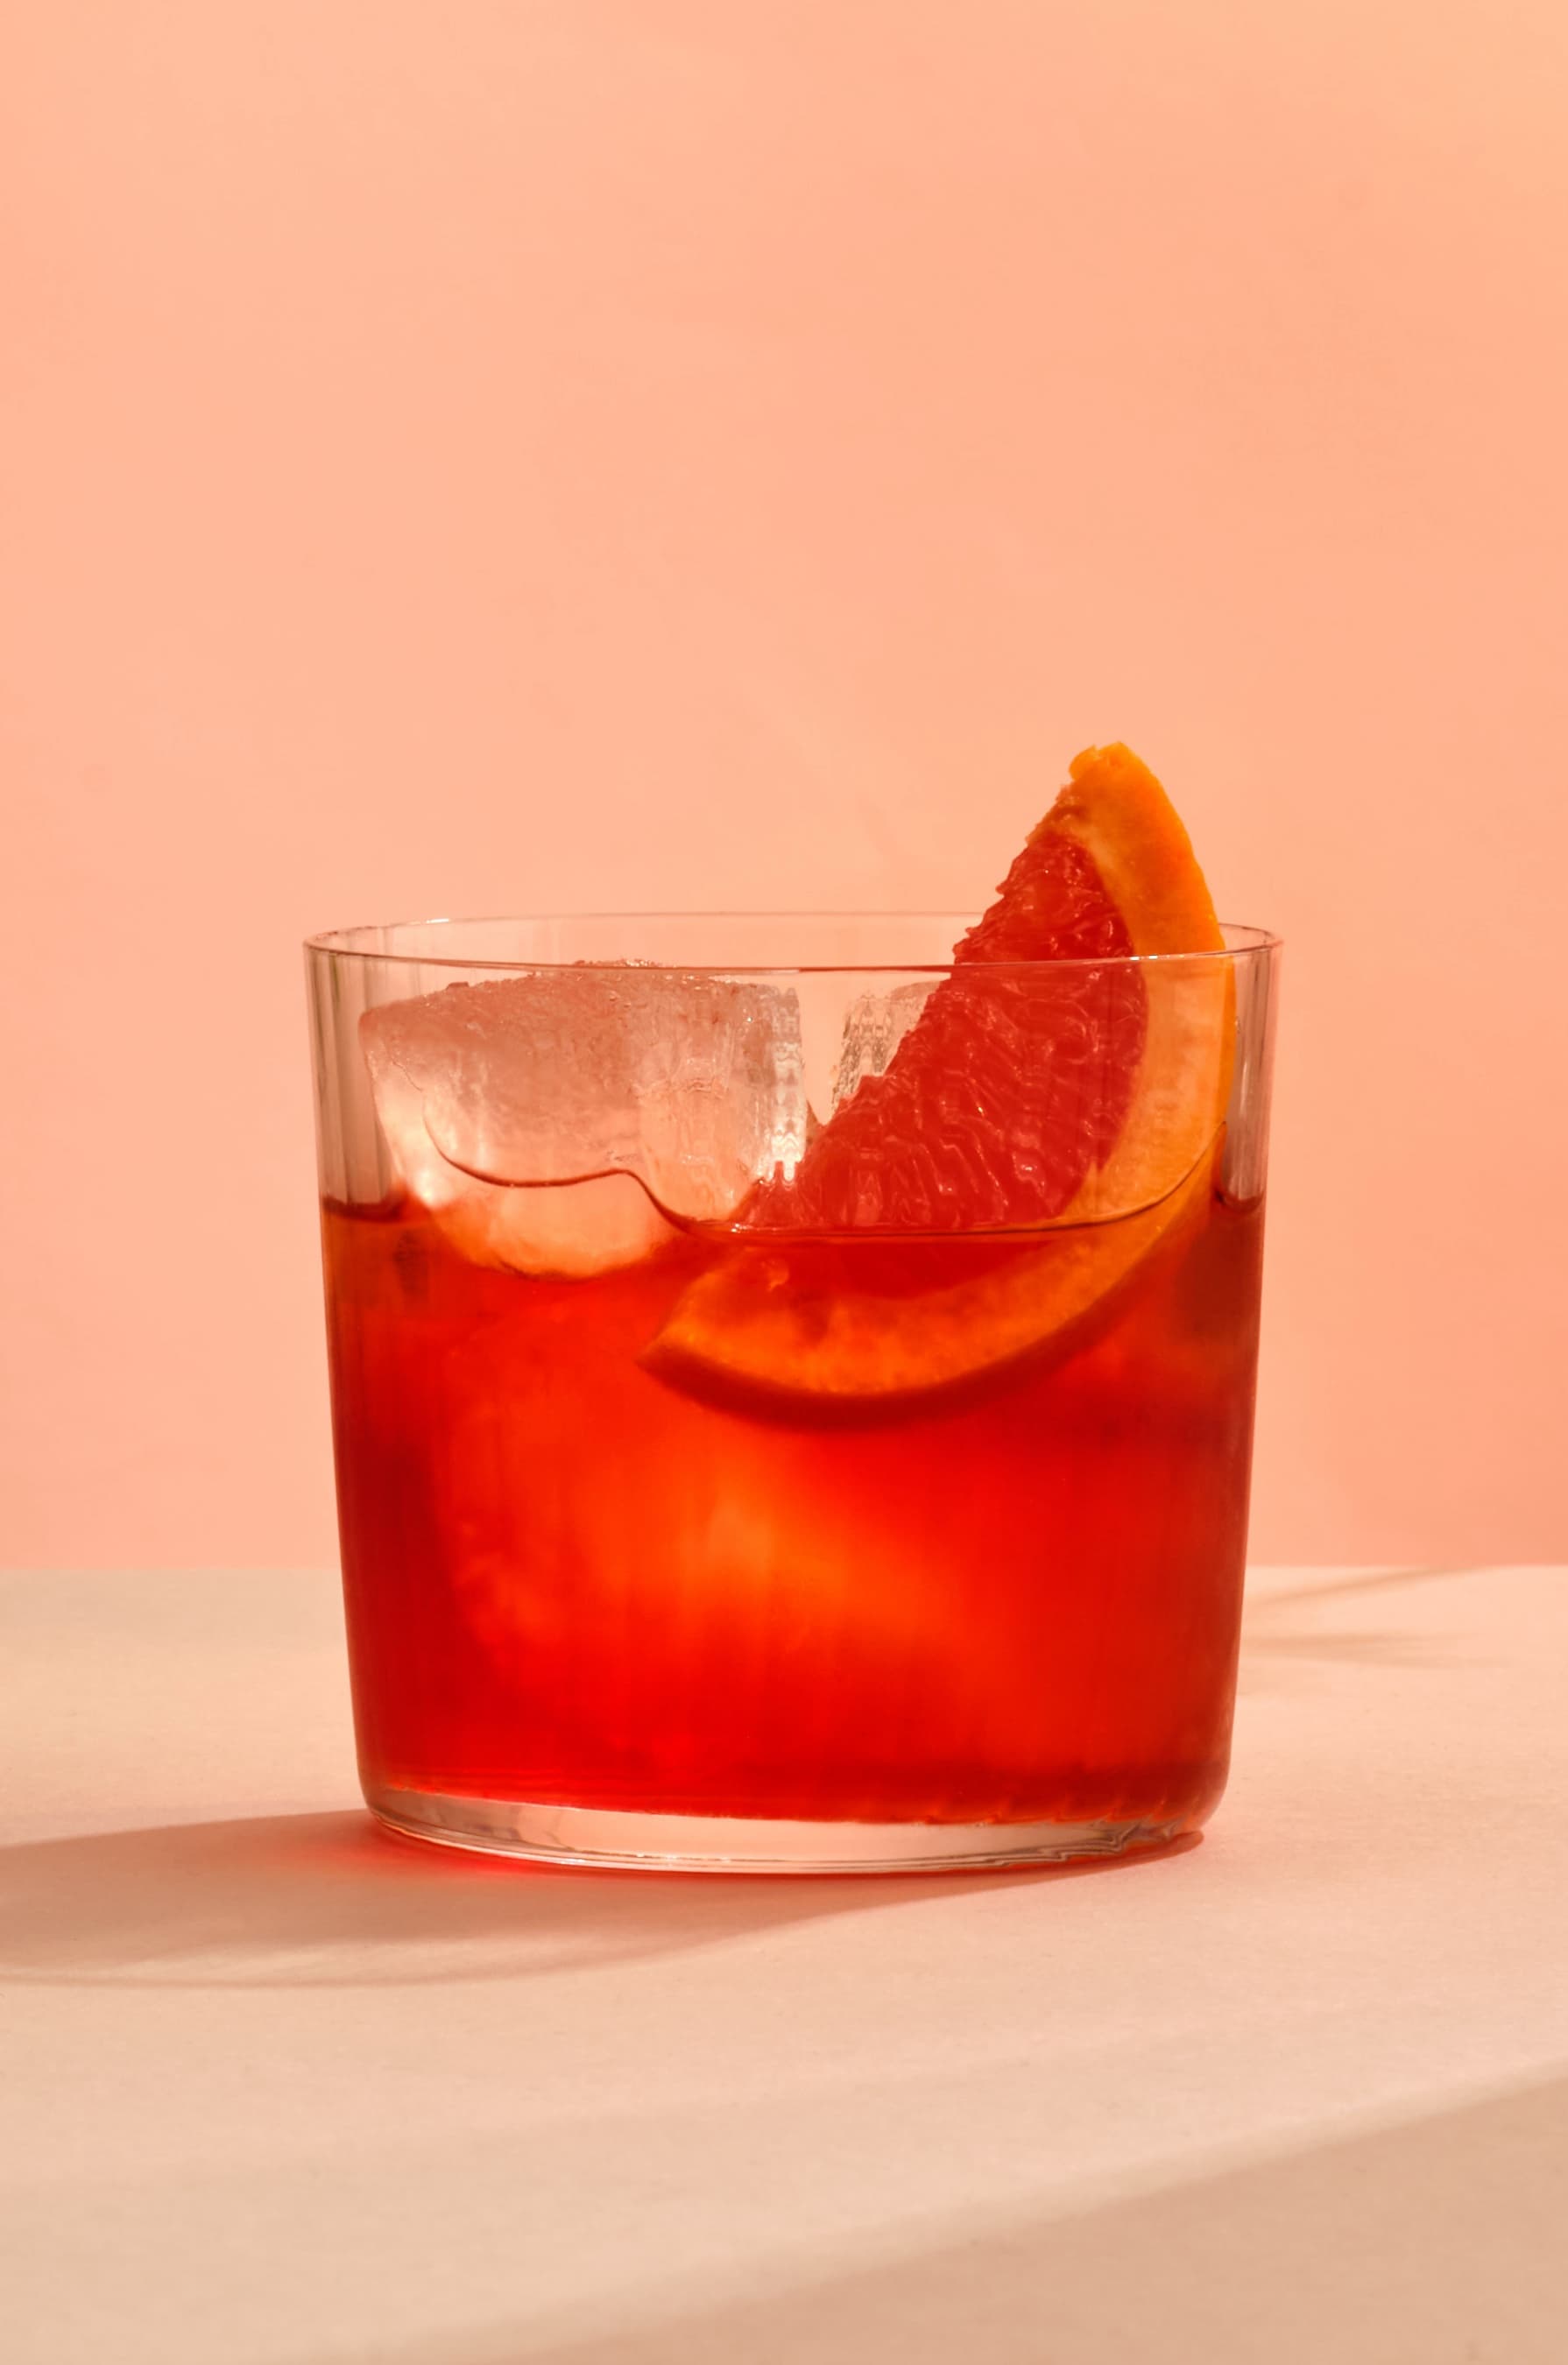 A Negroni cocktail made with Tanqueray Flor de Sevilla, garnished with a grapefruit slice.